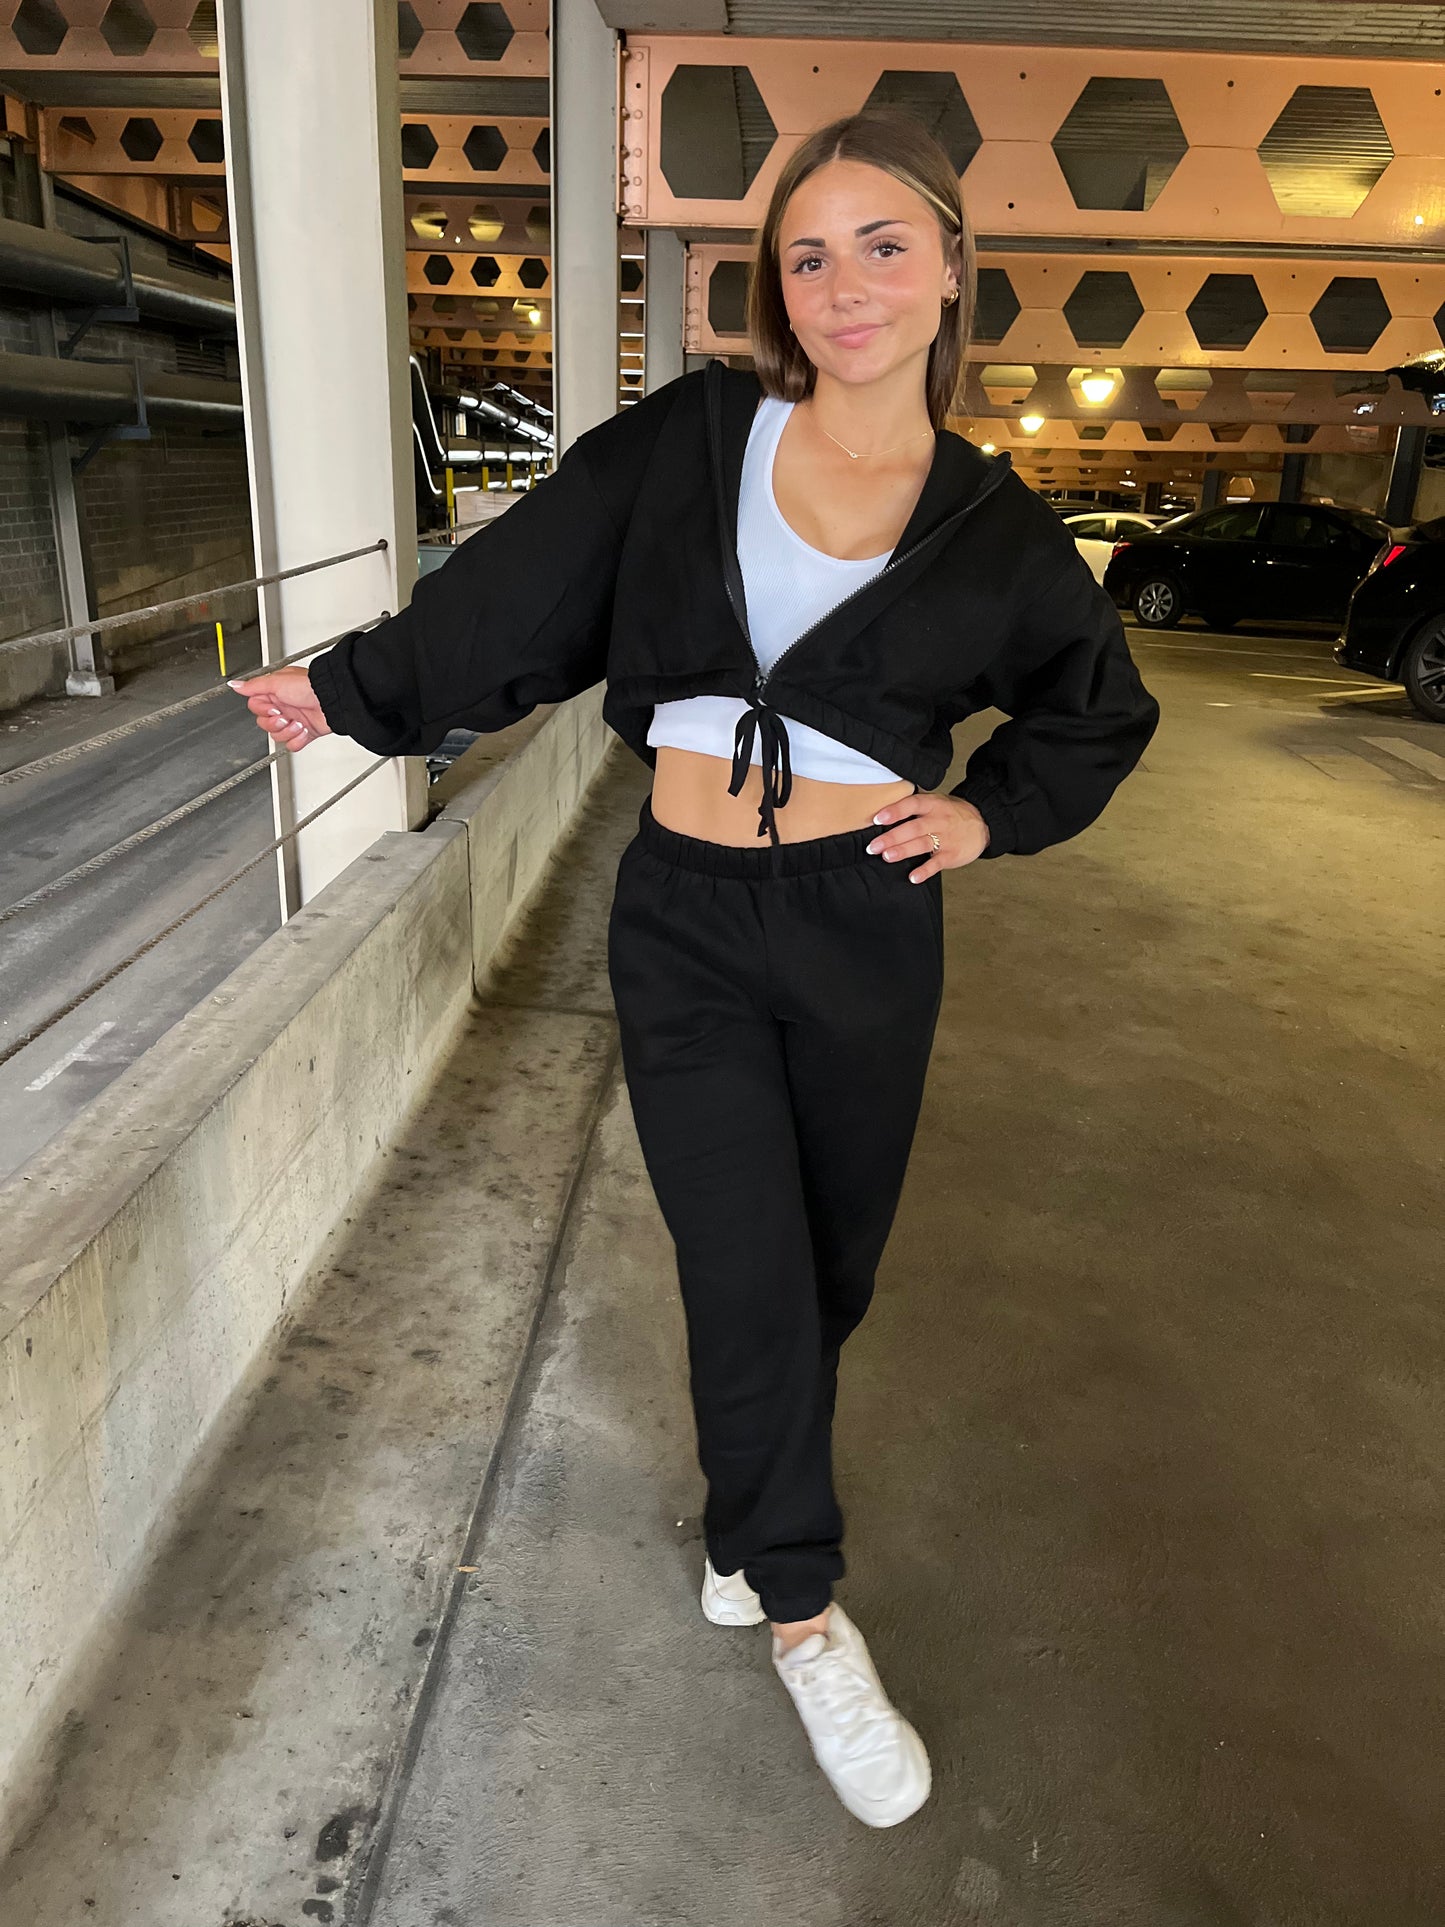 So Fetch Cropped Zip-Up in Black